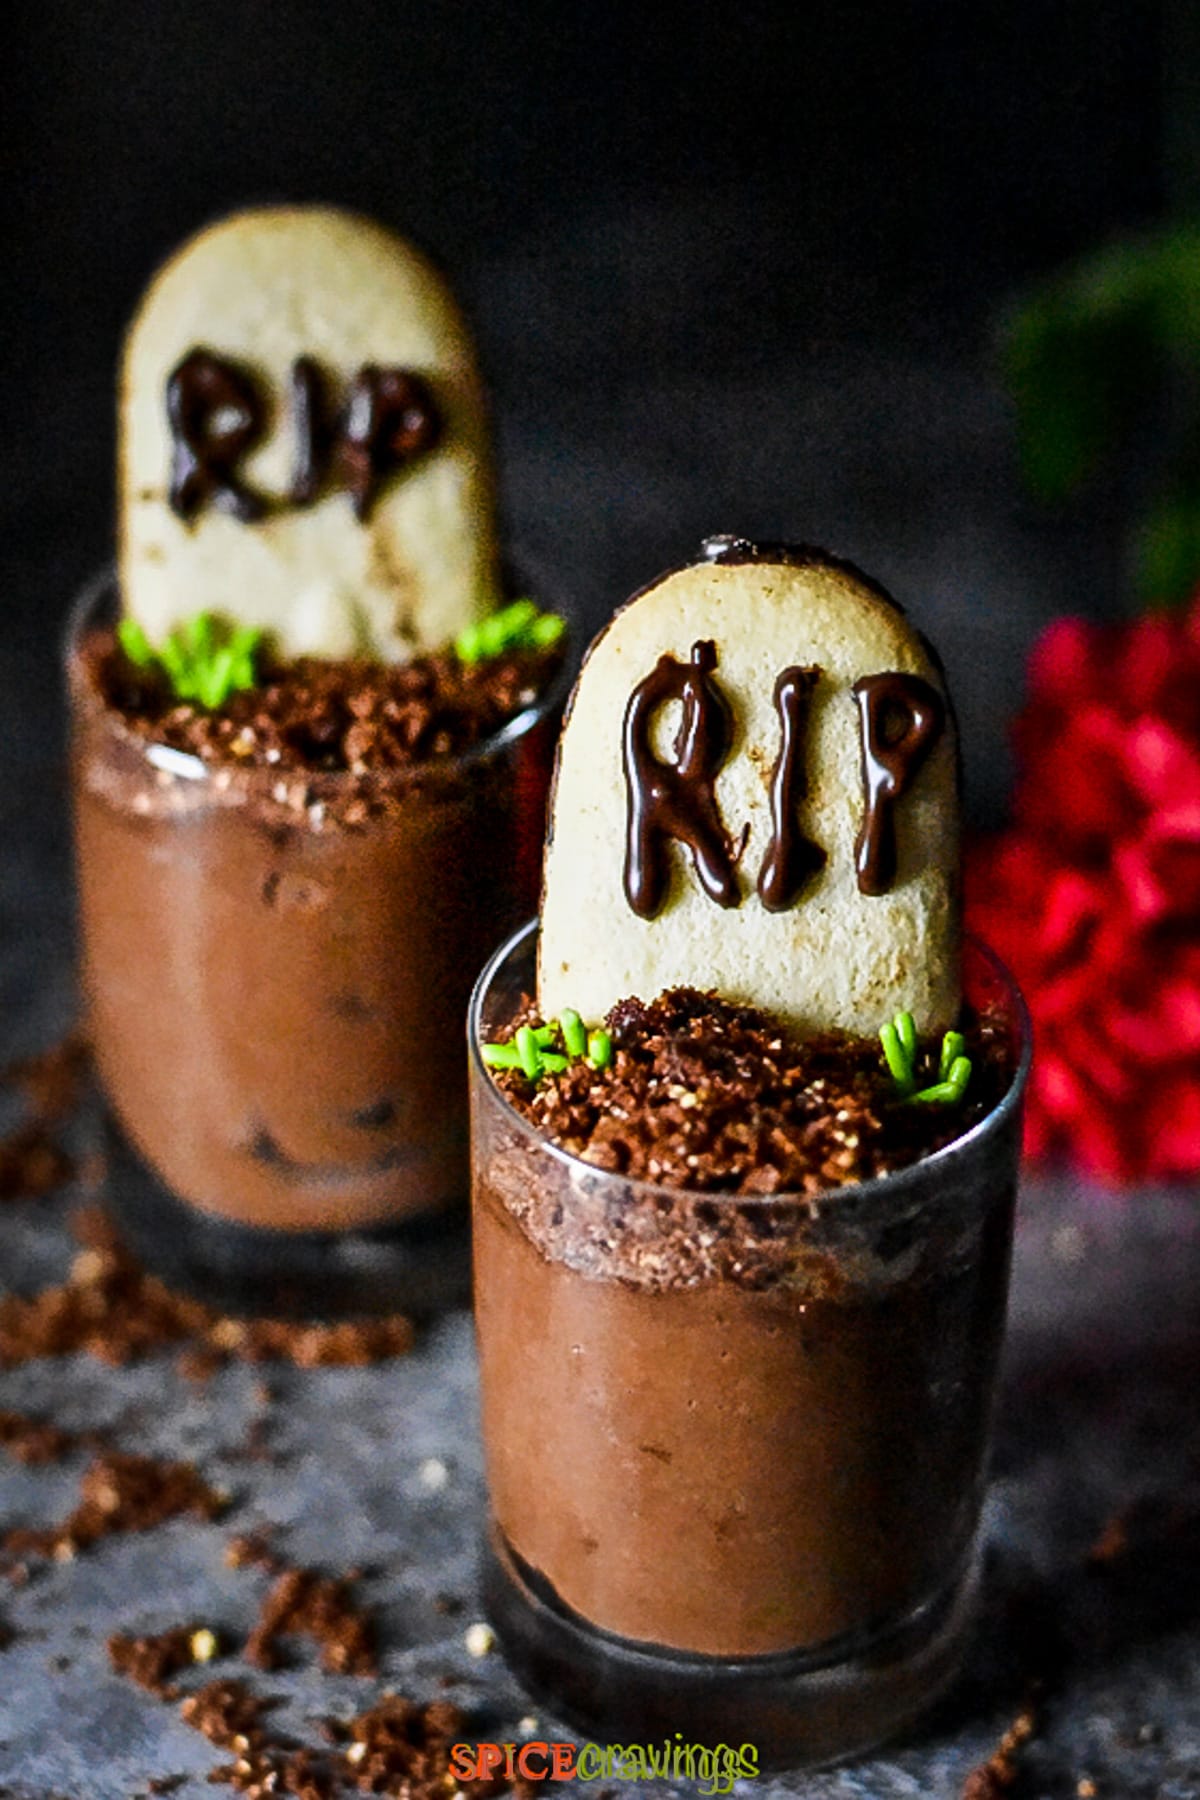 Two cups of chocolate mousse decorated like a graveyard to celebrate Halloween